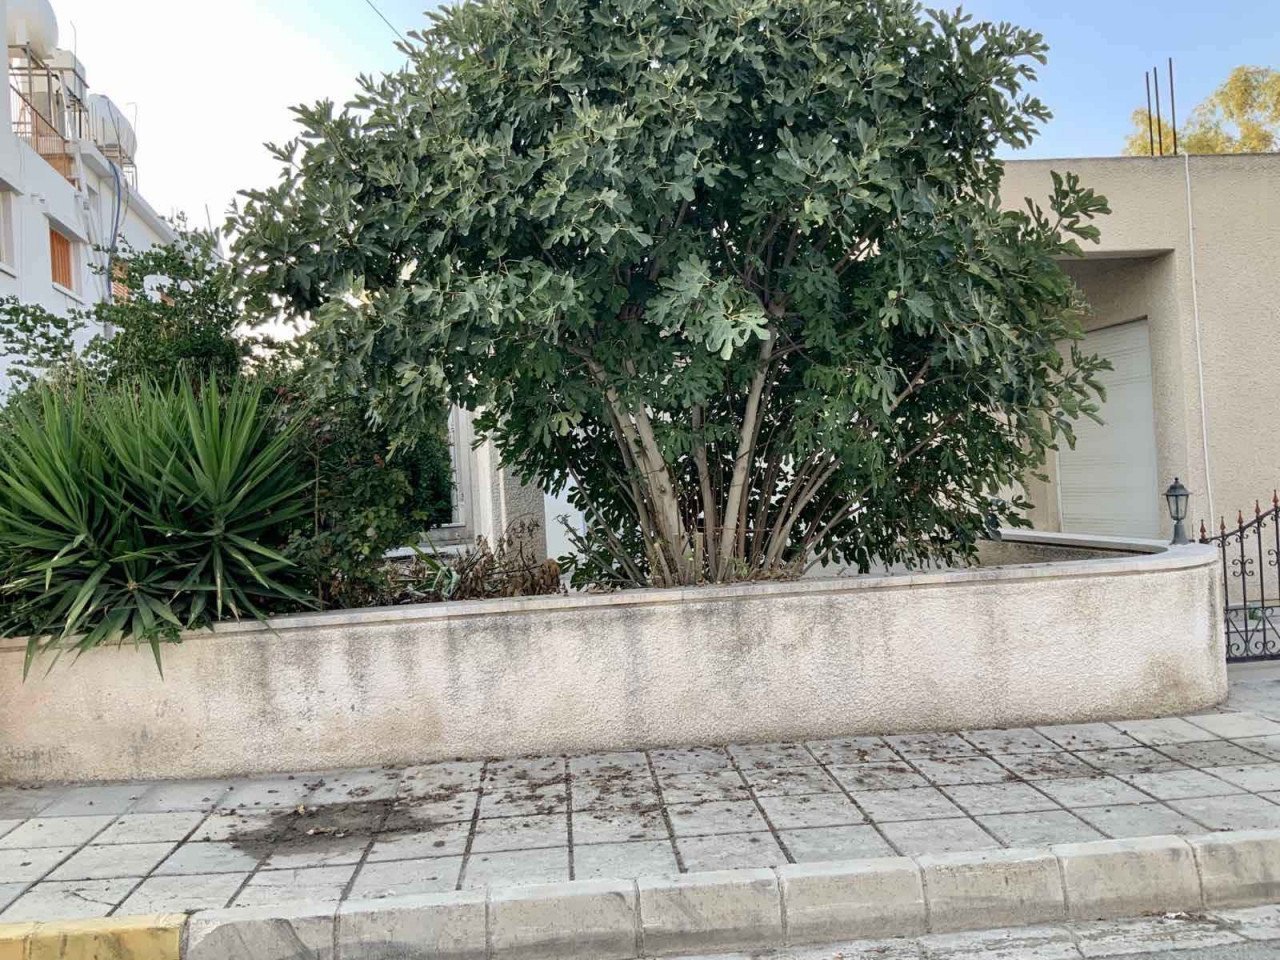 Property for Sale: House (Detached) in Strovolos, Nicosia  | Key Realtor Cyprus